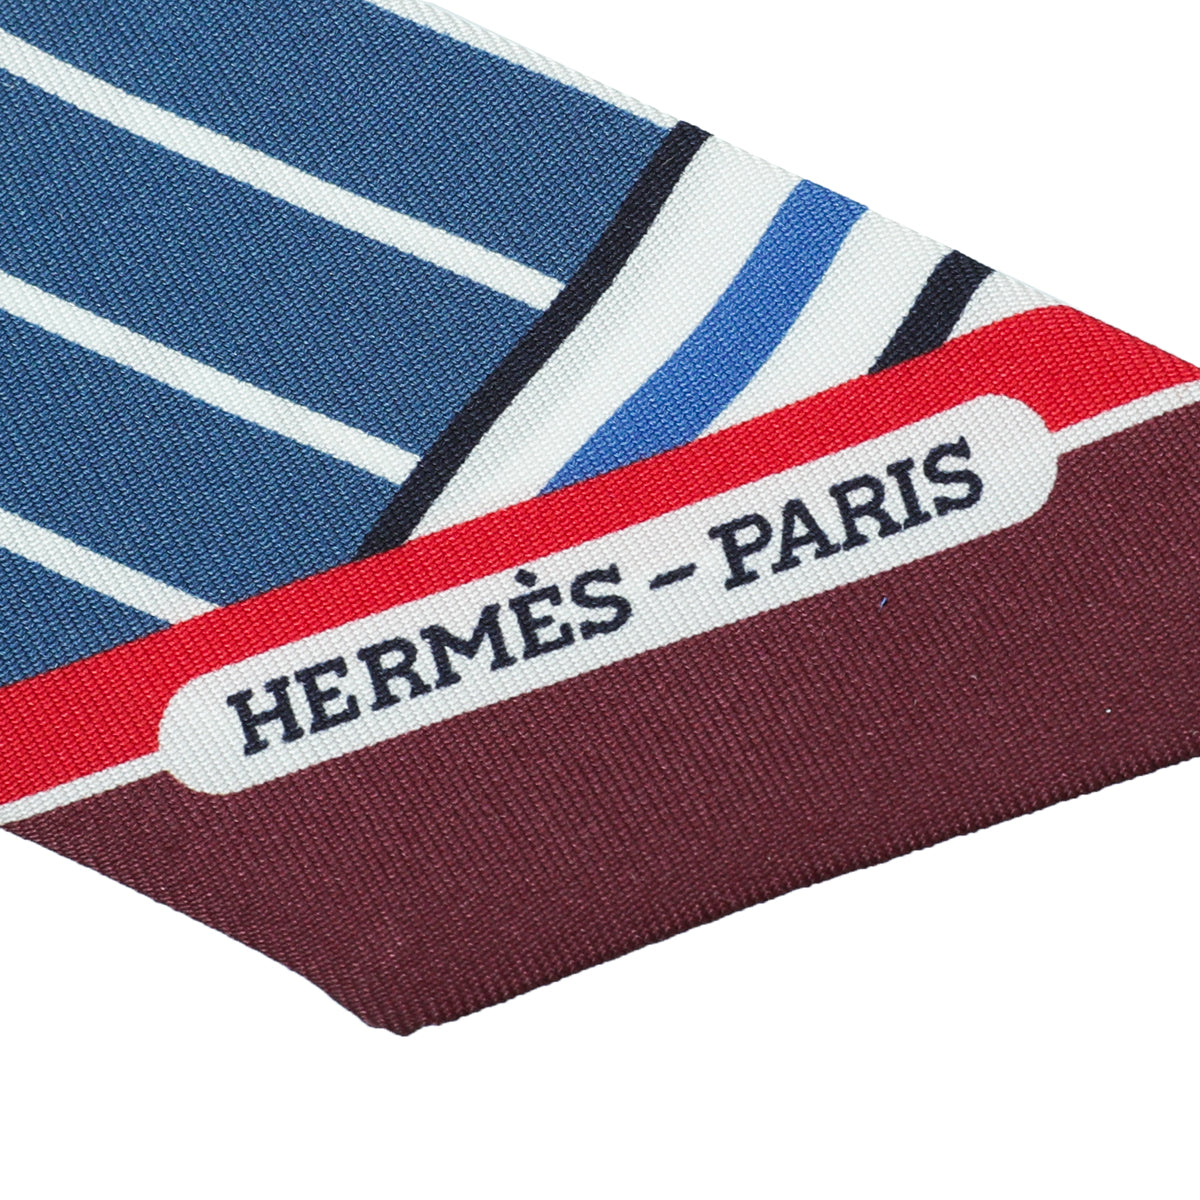 Hermes Tricolor Horse Print Twilly